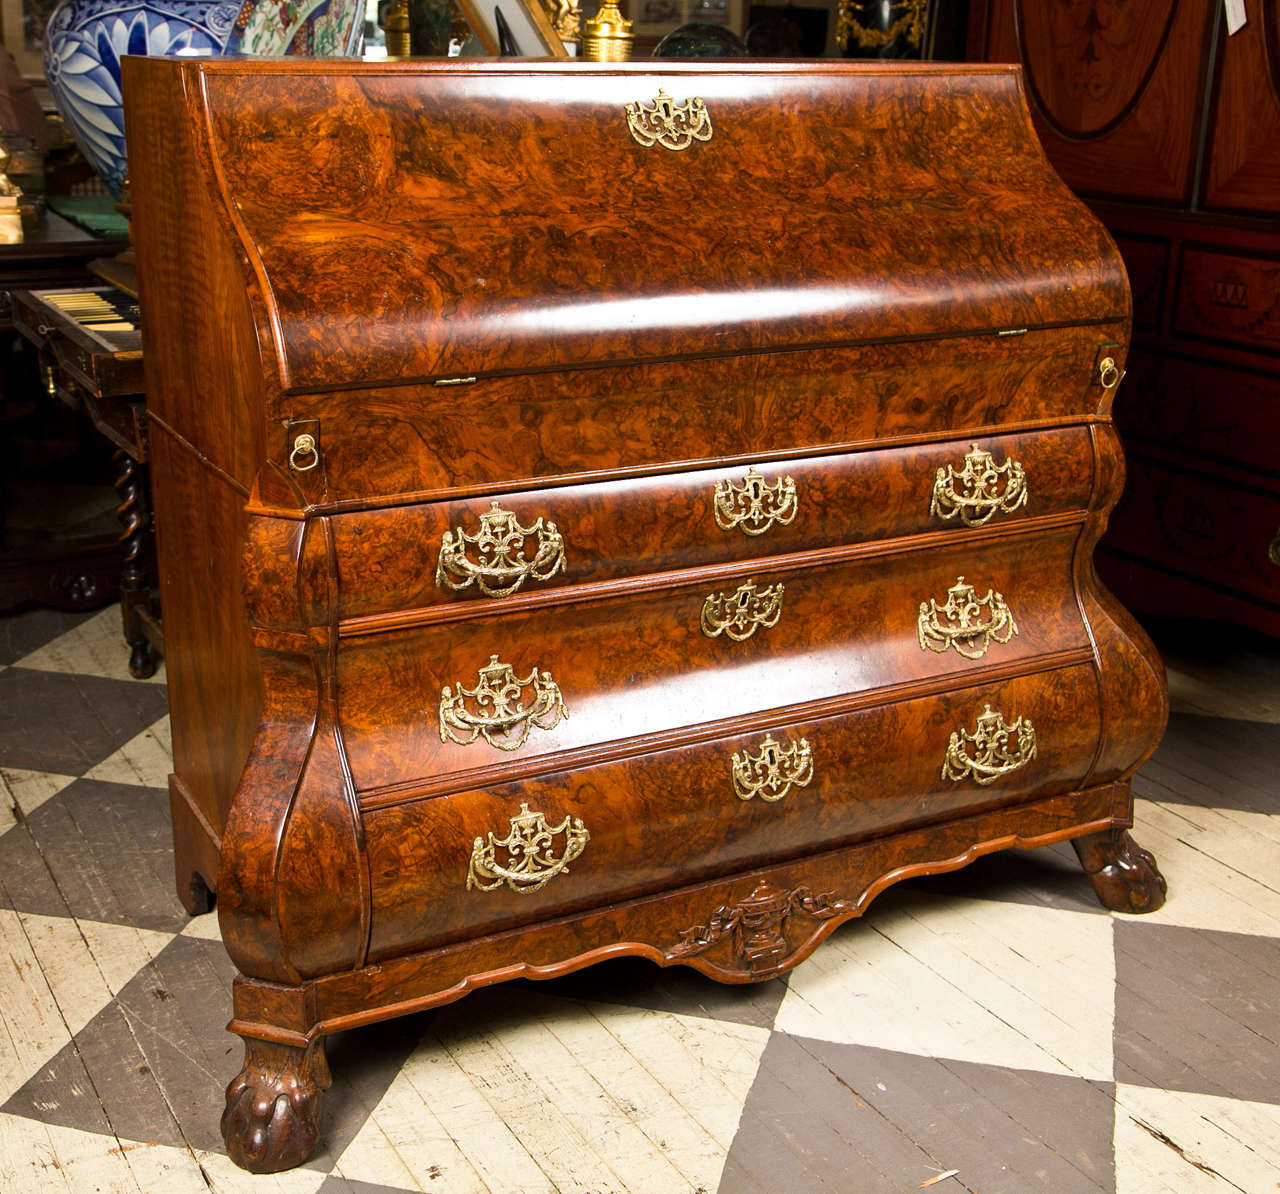 Burr walnut solids and veneers cover the entire secretary. The  S shaped  drop front is very unusual and it rests flat on accommodating pull out sleepers or supports. The interior  with small drawers, 2  pilaster fronted hidden compartments, 